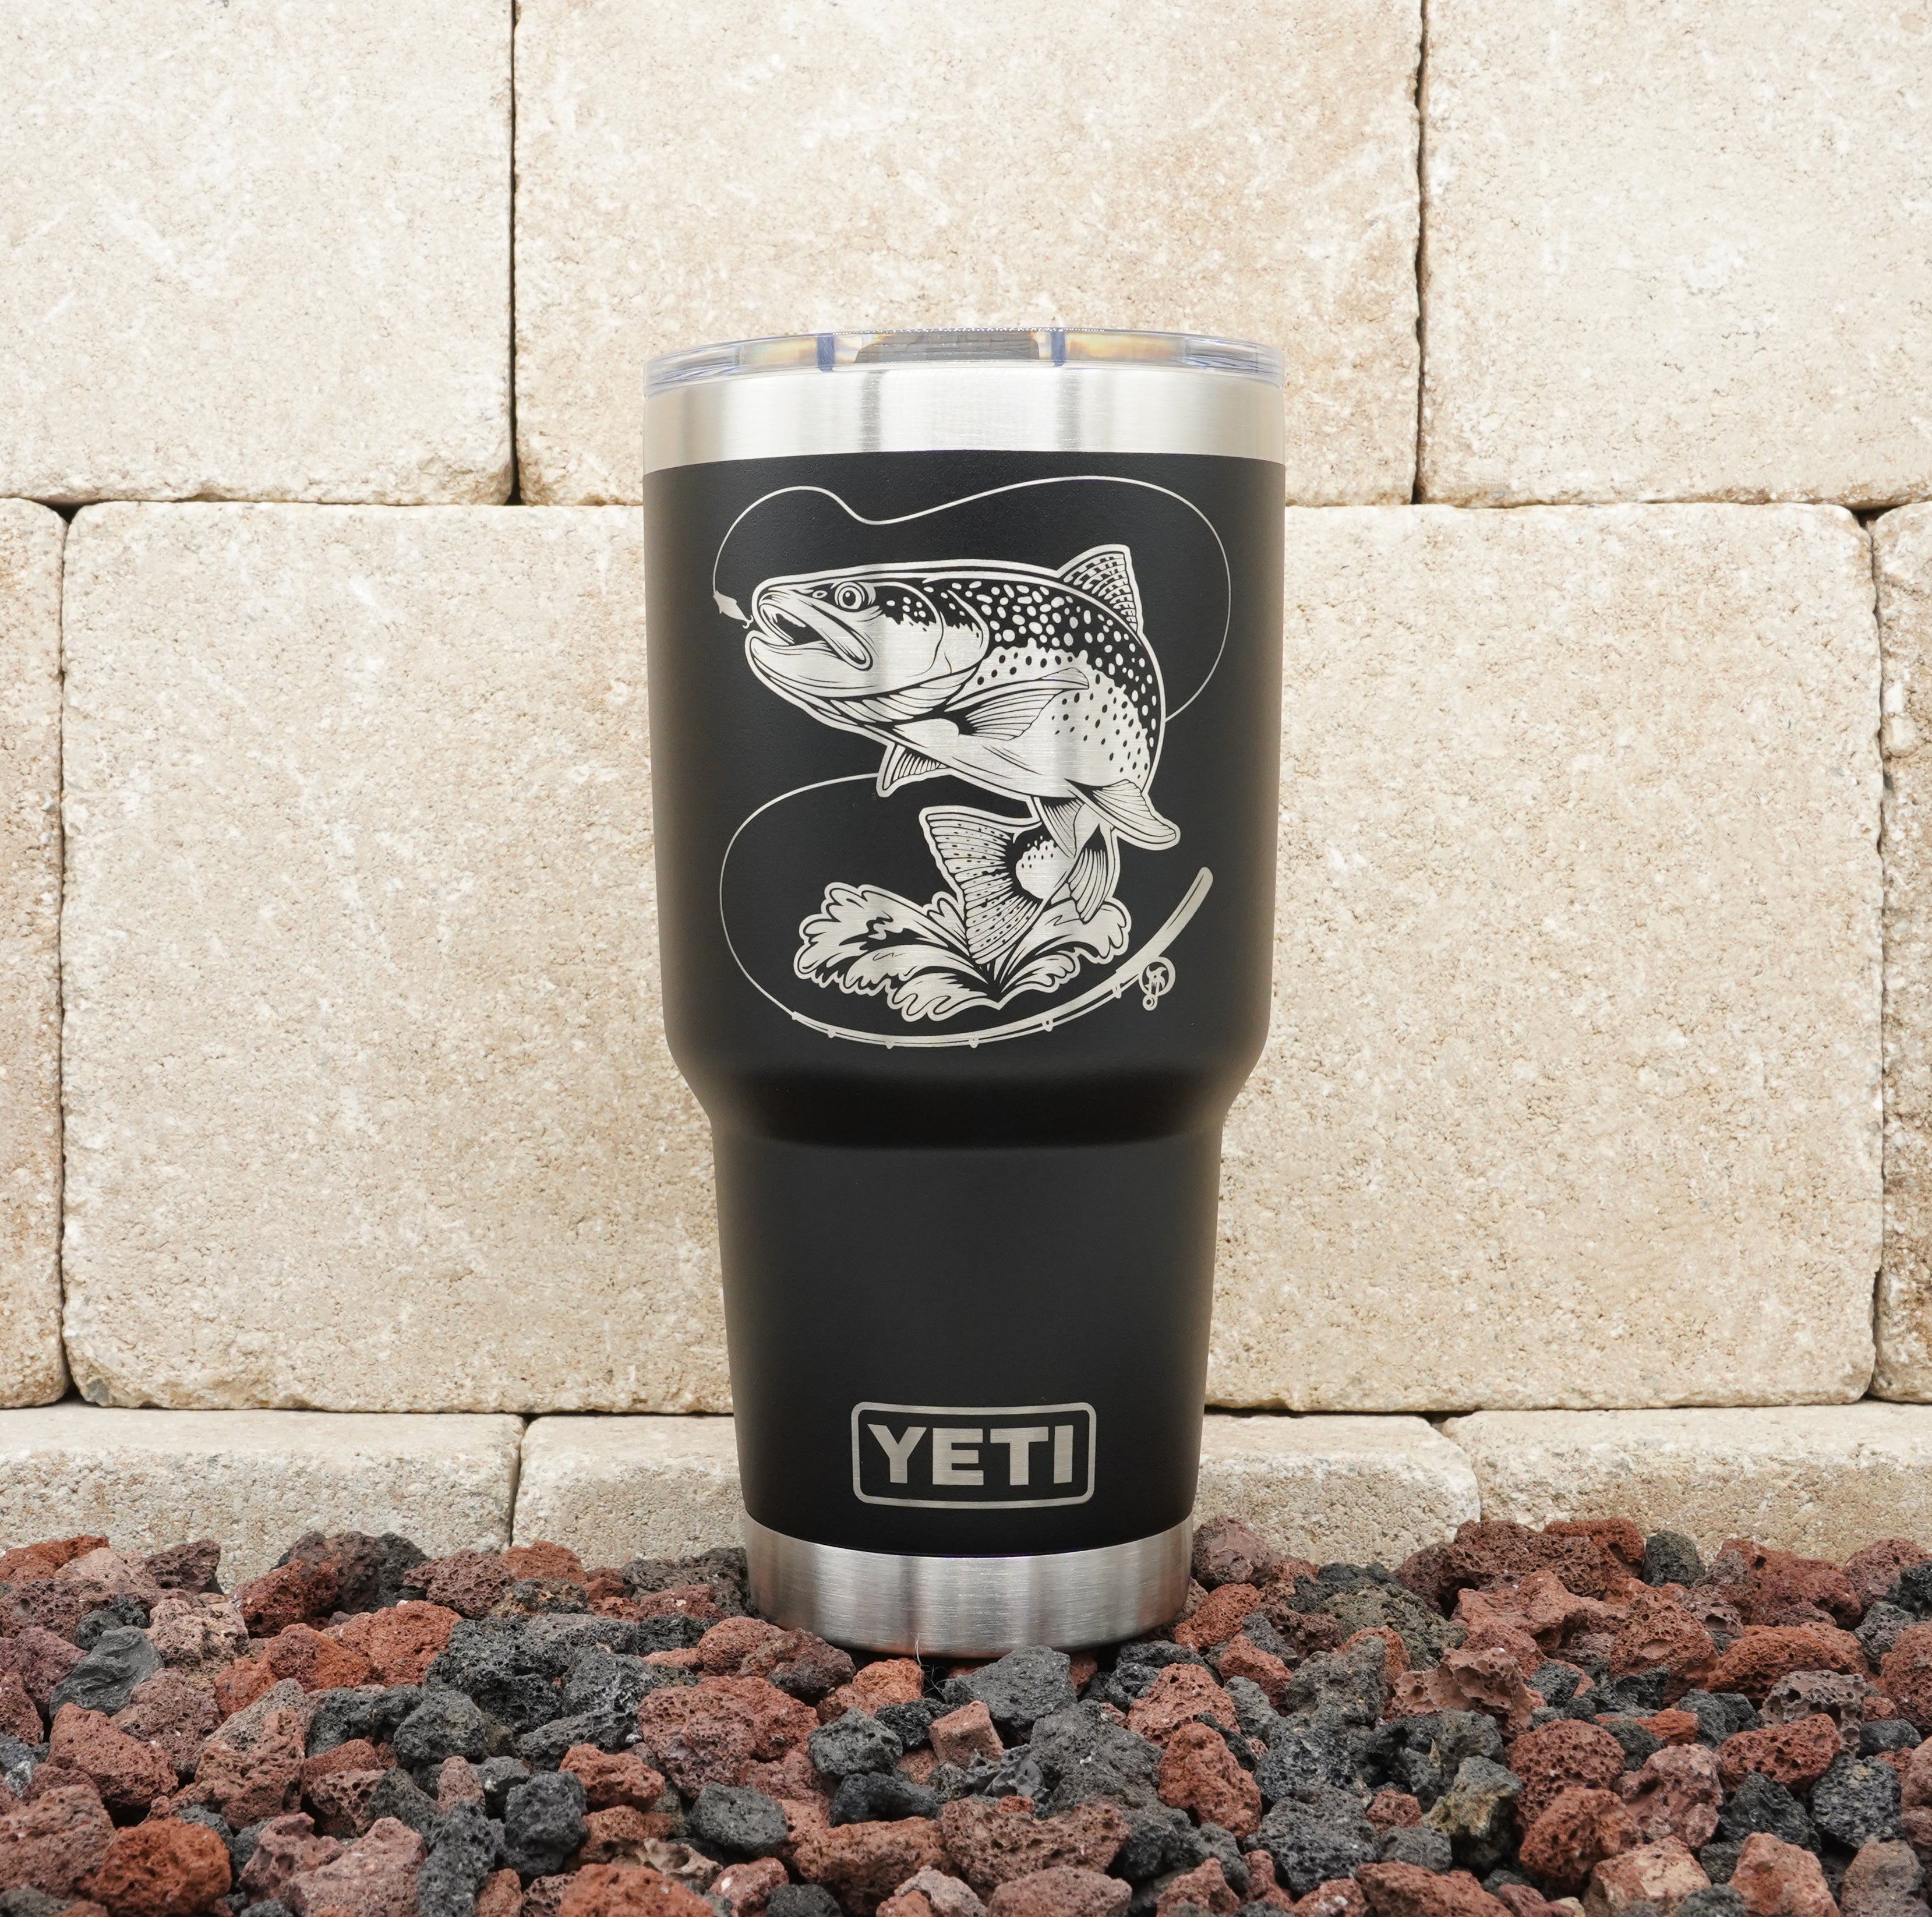 SHIPS QUICK Engraved YETI® Colster or Polar Camel Came From Your